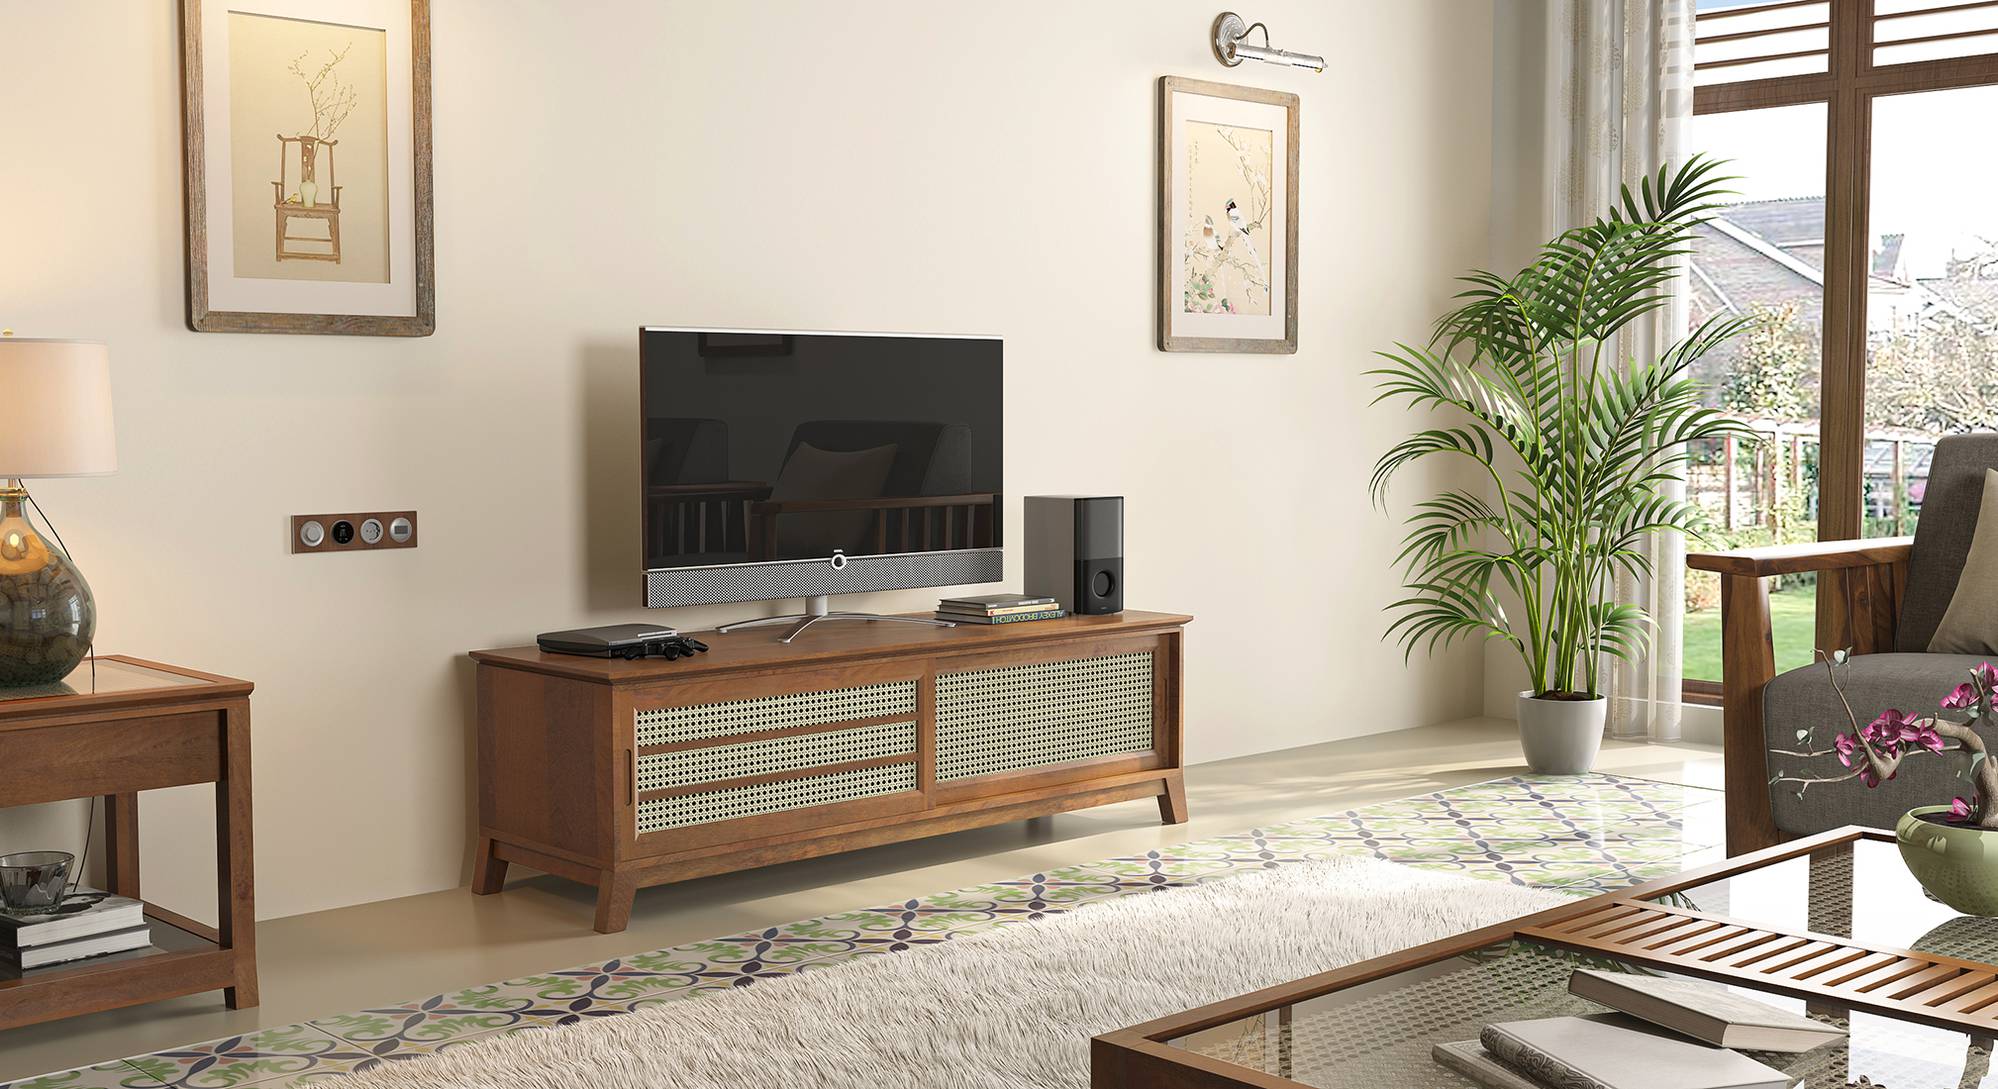 5 Tv Unit Ideas To Amp Up Your Living Room Decor